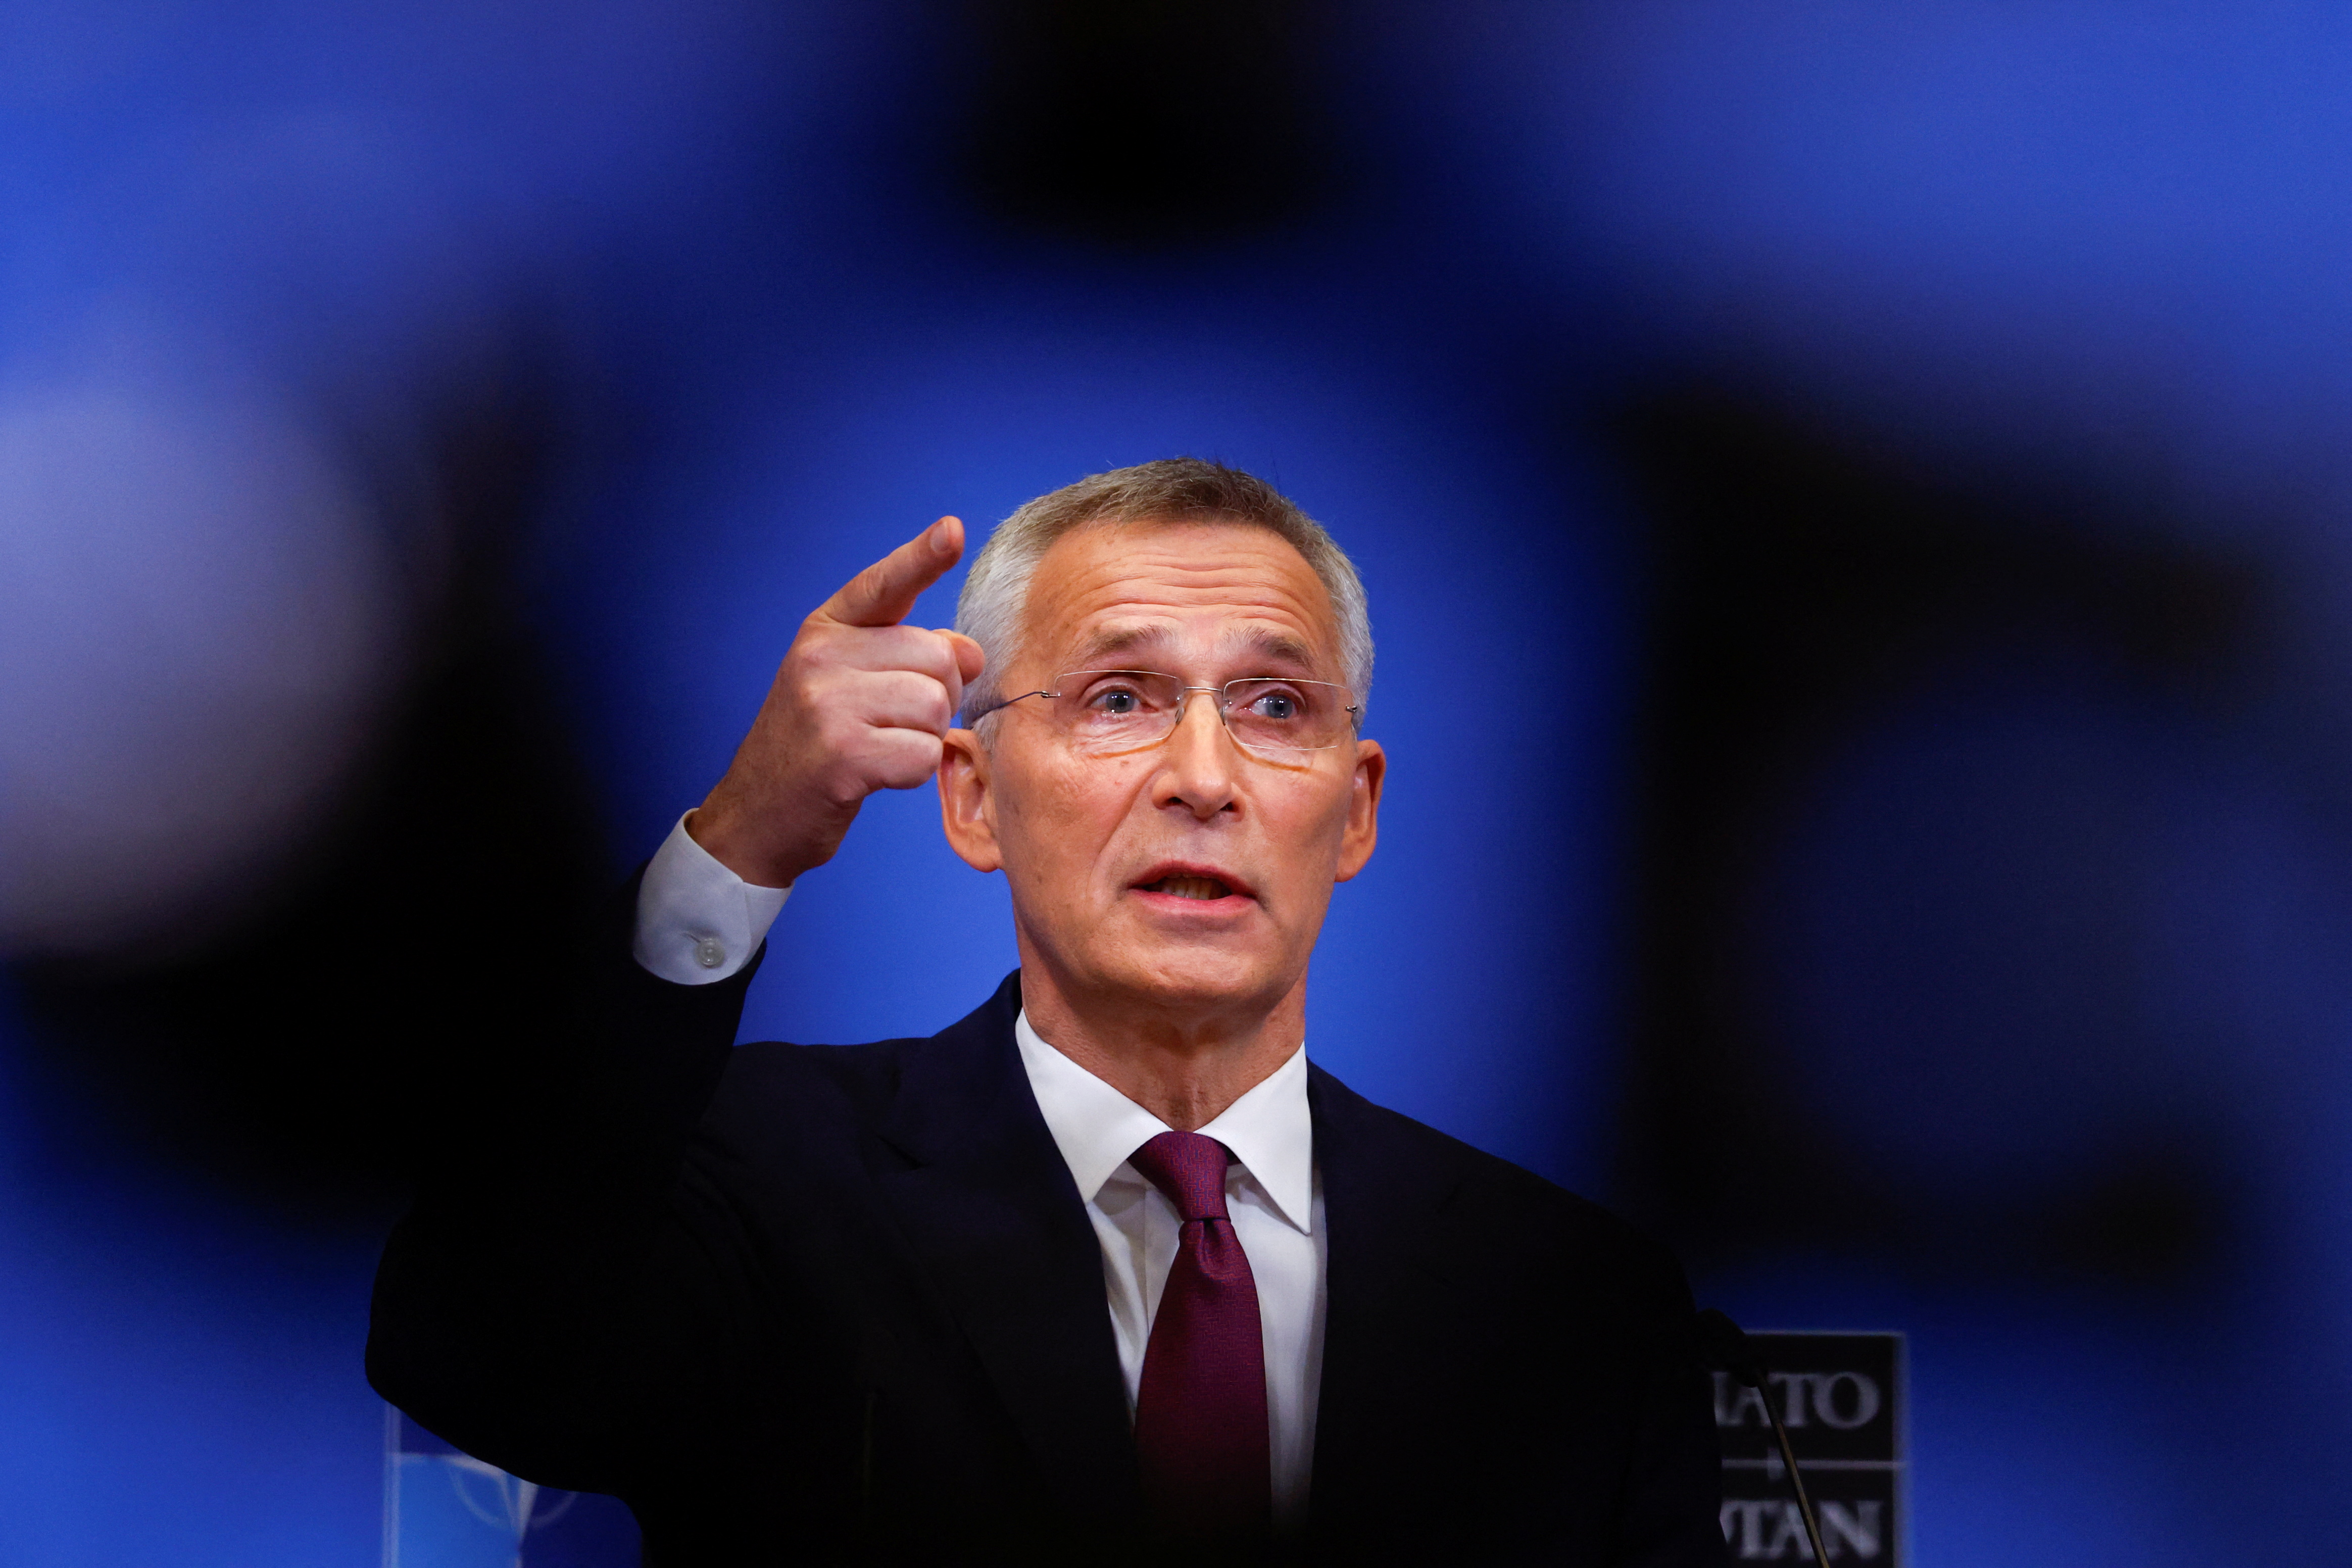 NATO Secretary General Stoltenberg attends news conference before NATO summit, in Brussels